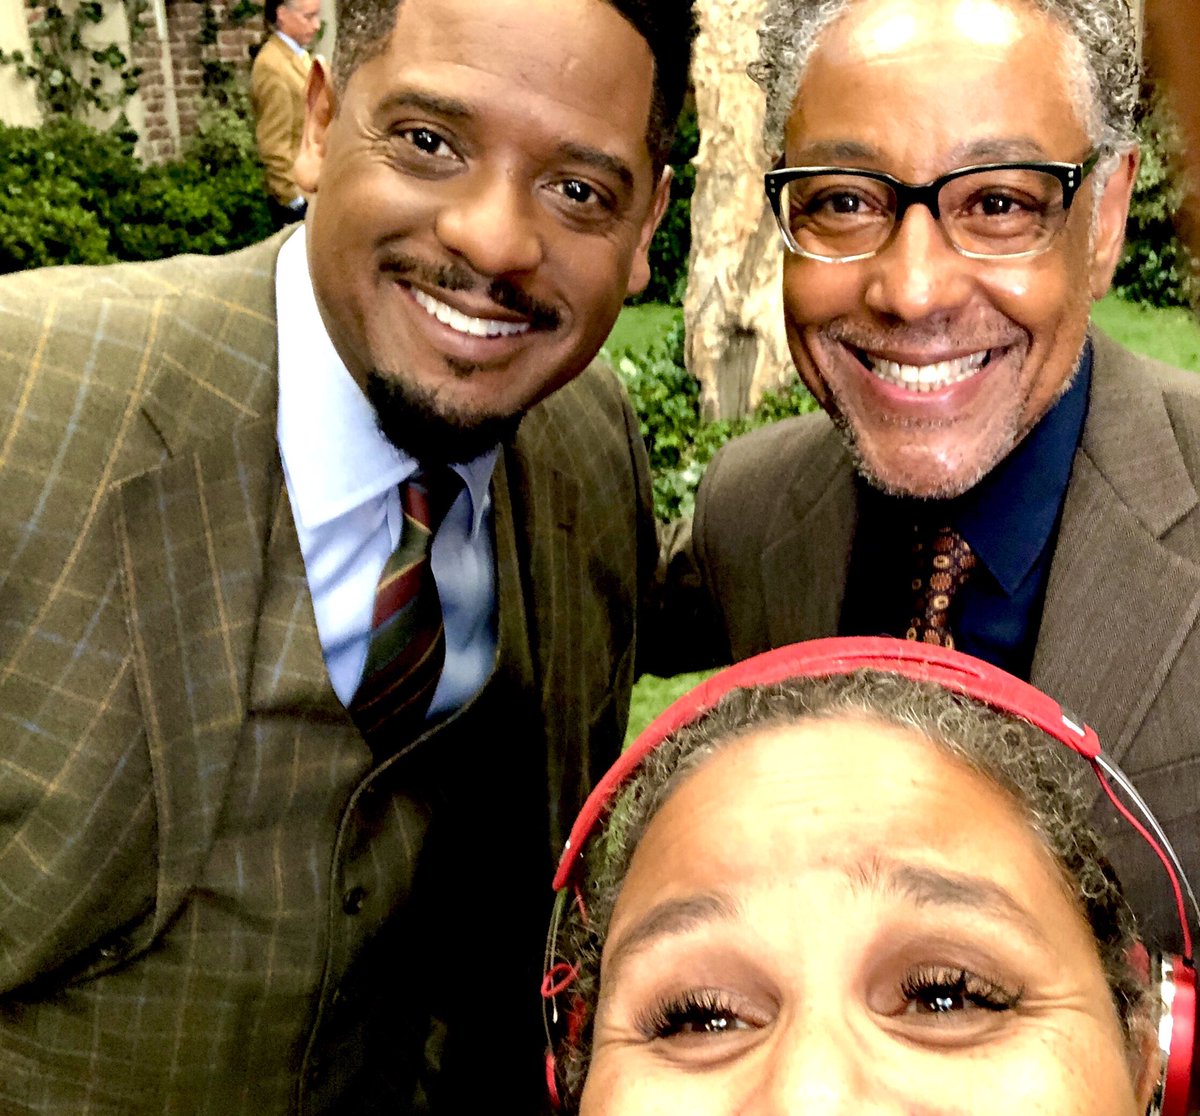 Ran into the brilliant Giancarlo Esposito @quiethandfilms & equally brilliant Exec. Pro. & Showrunner #Yvetteleebowser on the set of @dearwhitepeople for @netflix. New episodes to come. It’s WAY ON! #summer2019